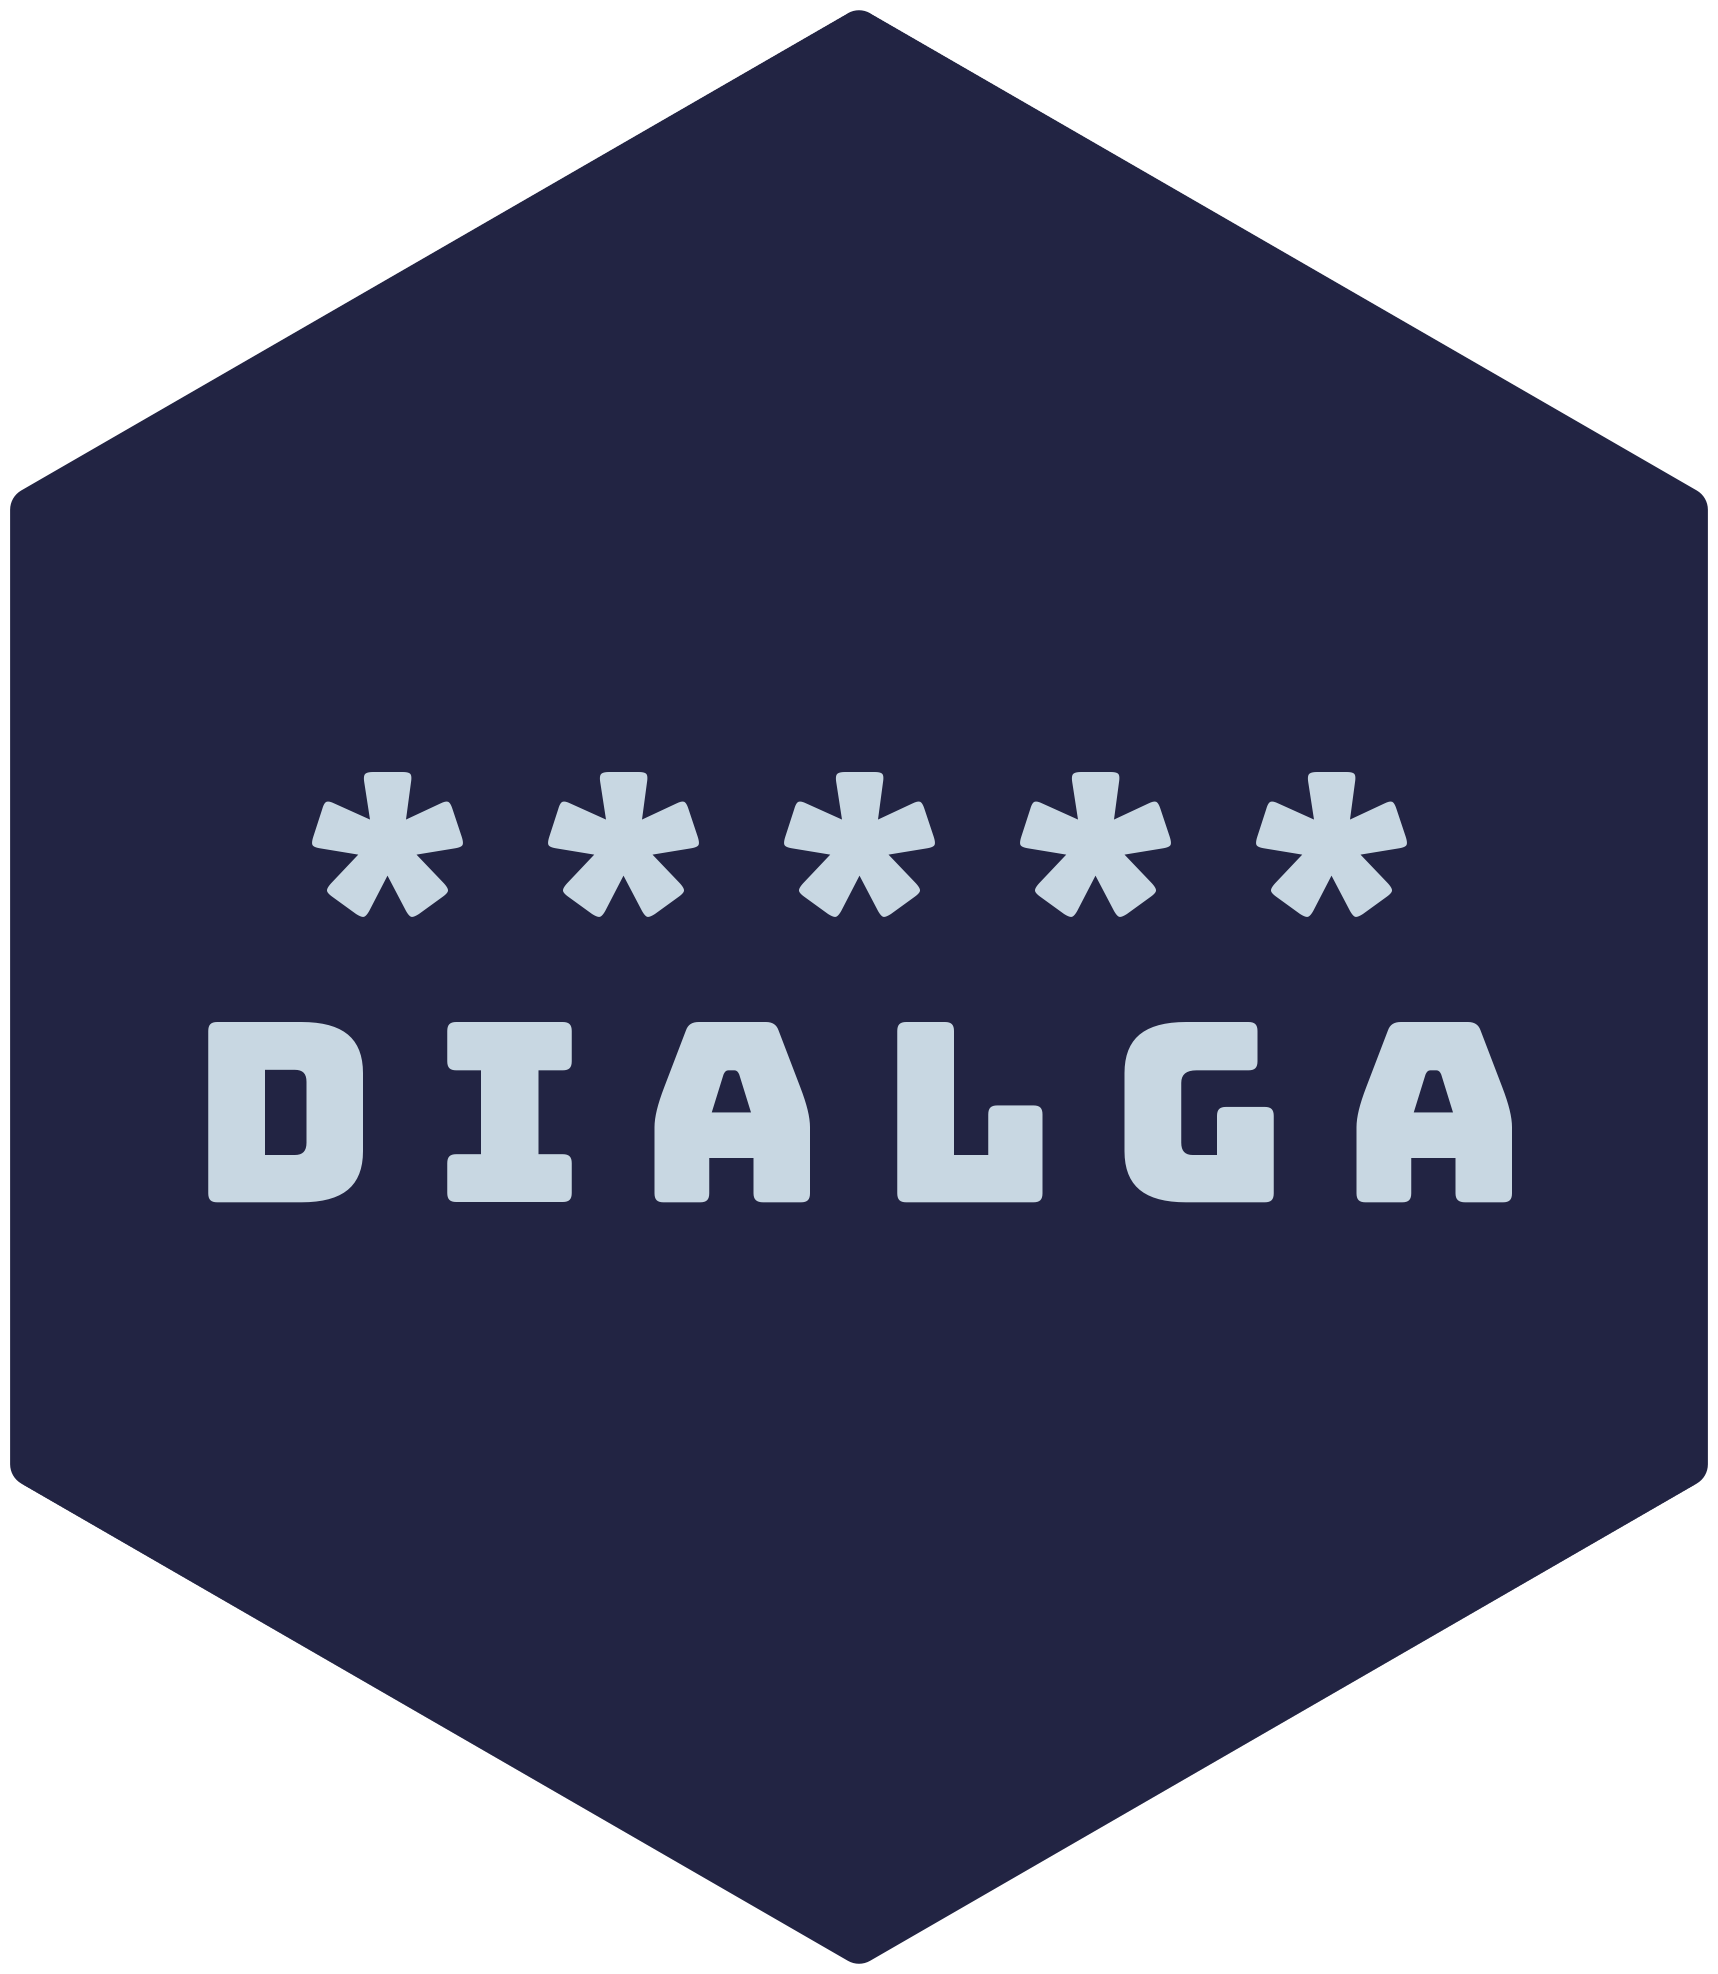 Hexagonal logo for the dialga package showing the package name underneath the five asterisks of a cron string that represents an 'every minute' schedule.